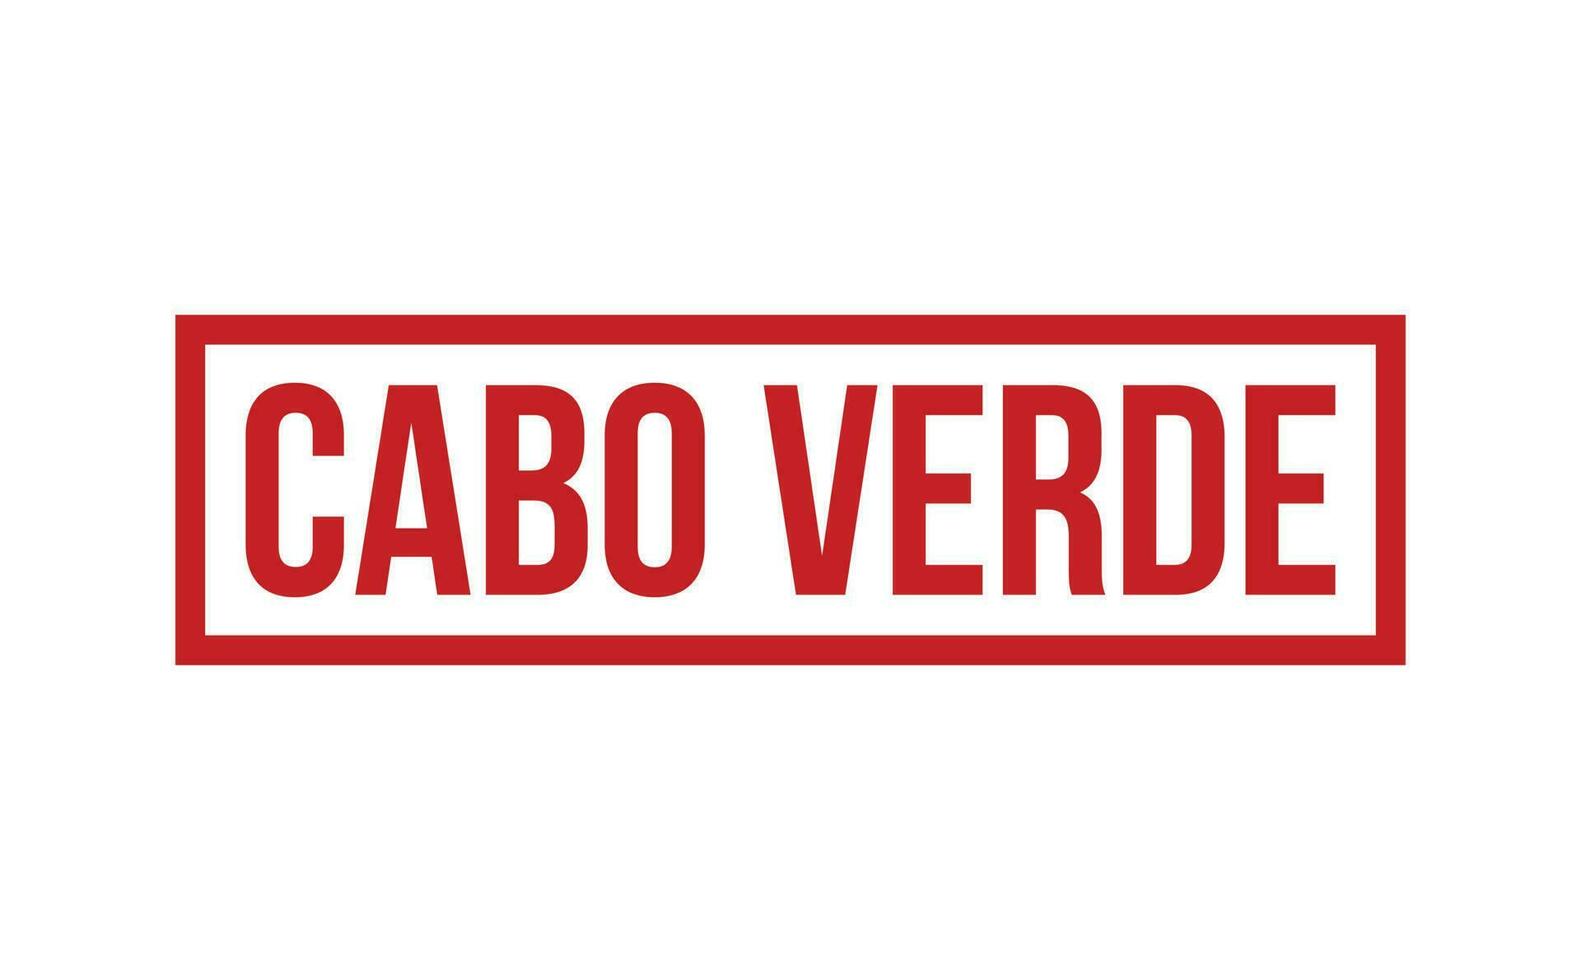 Cabo Verde Rubber Stamp Seal Vector